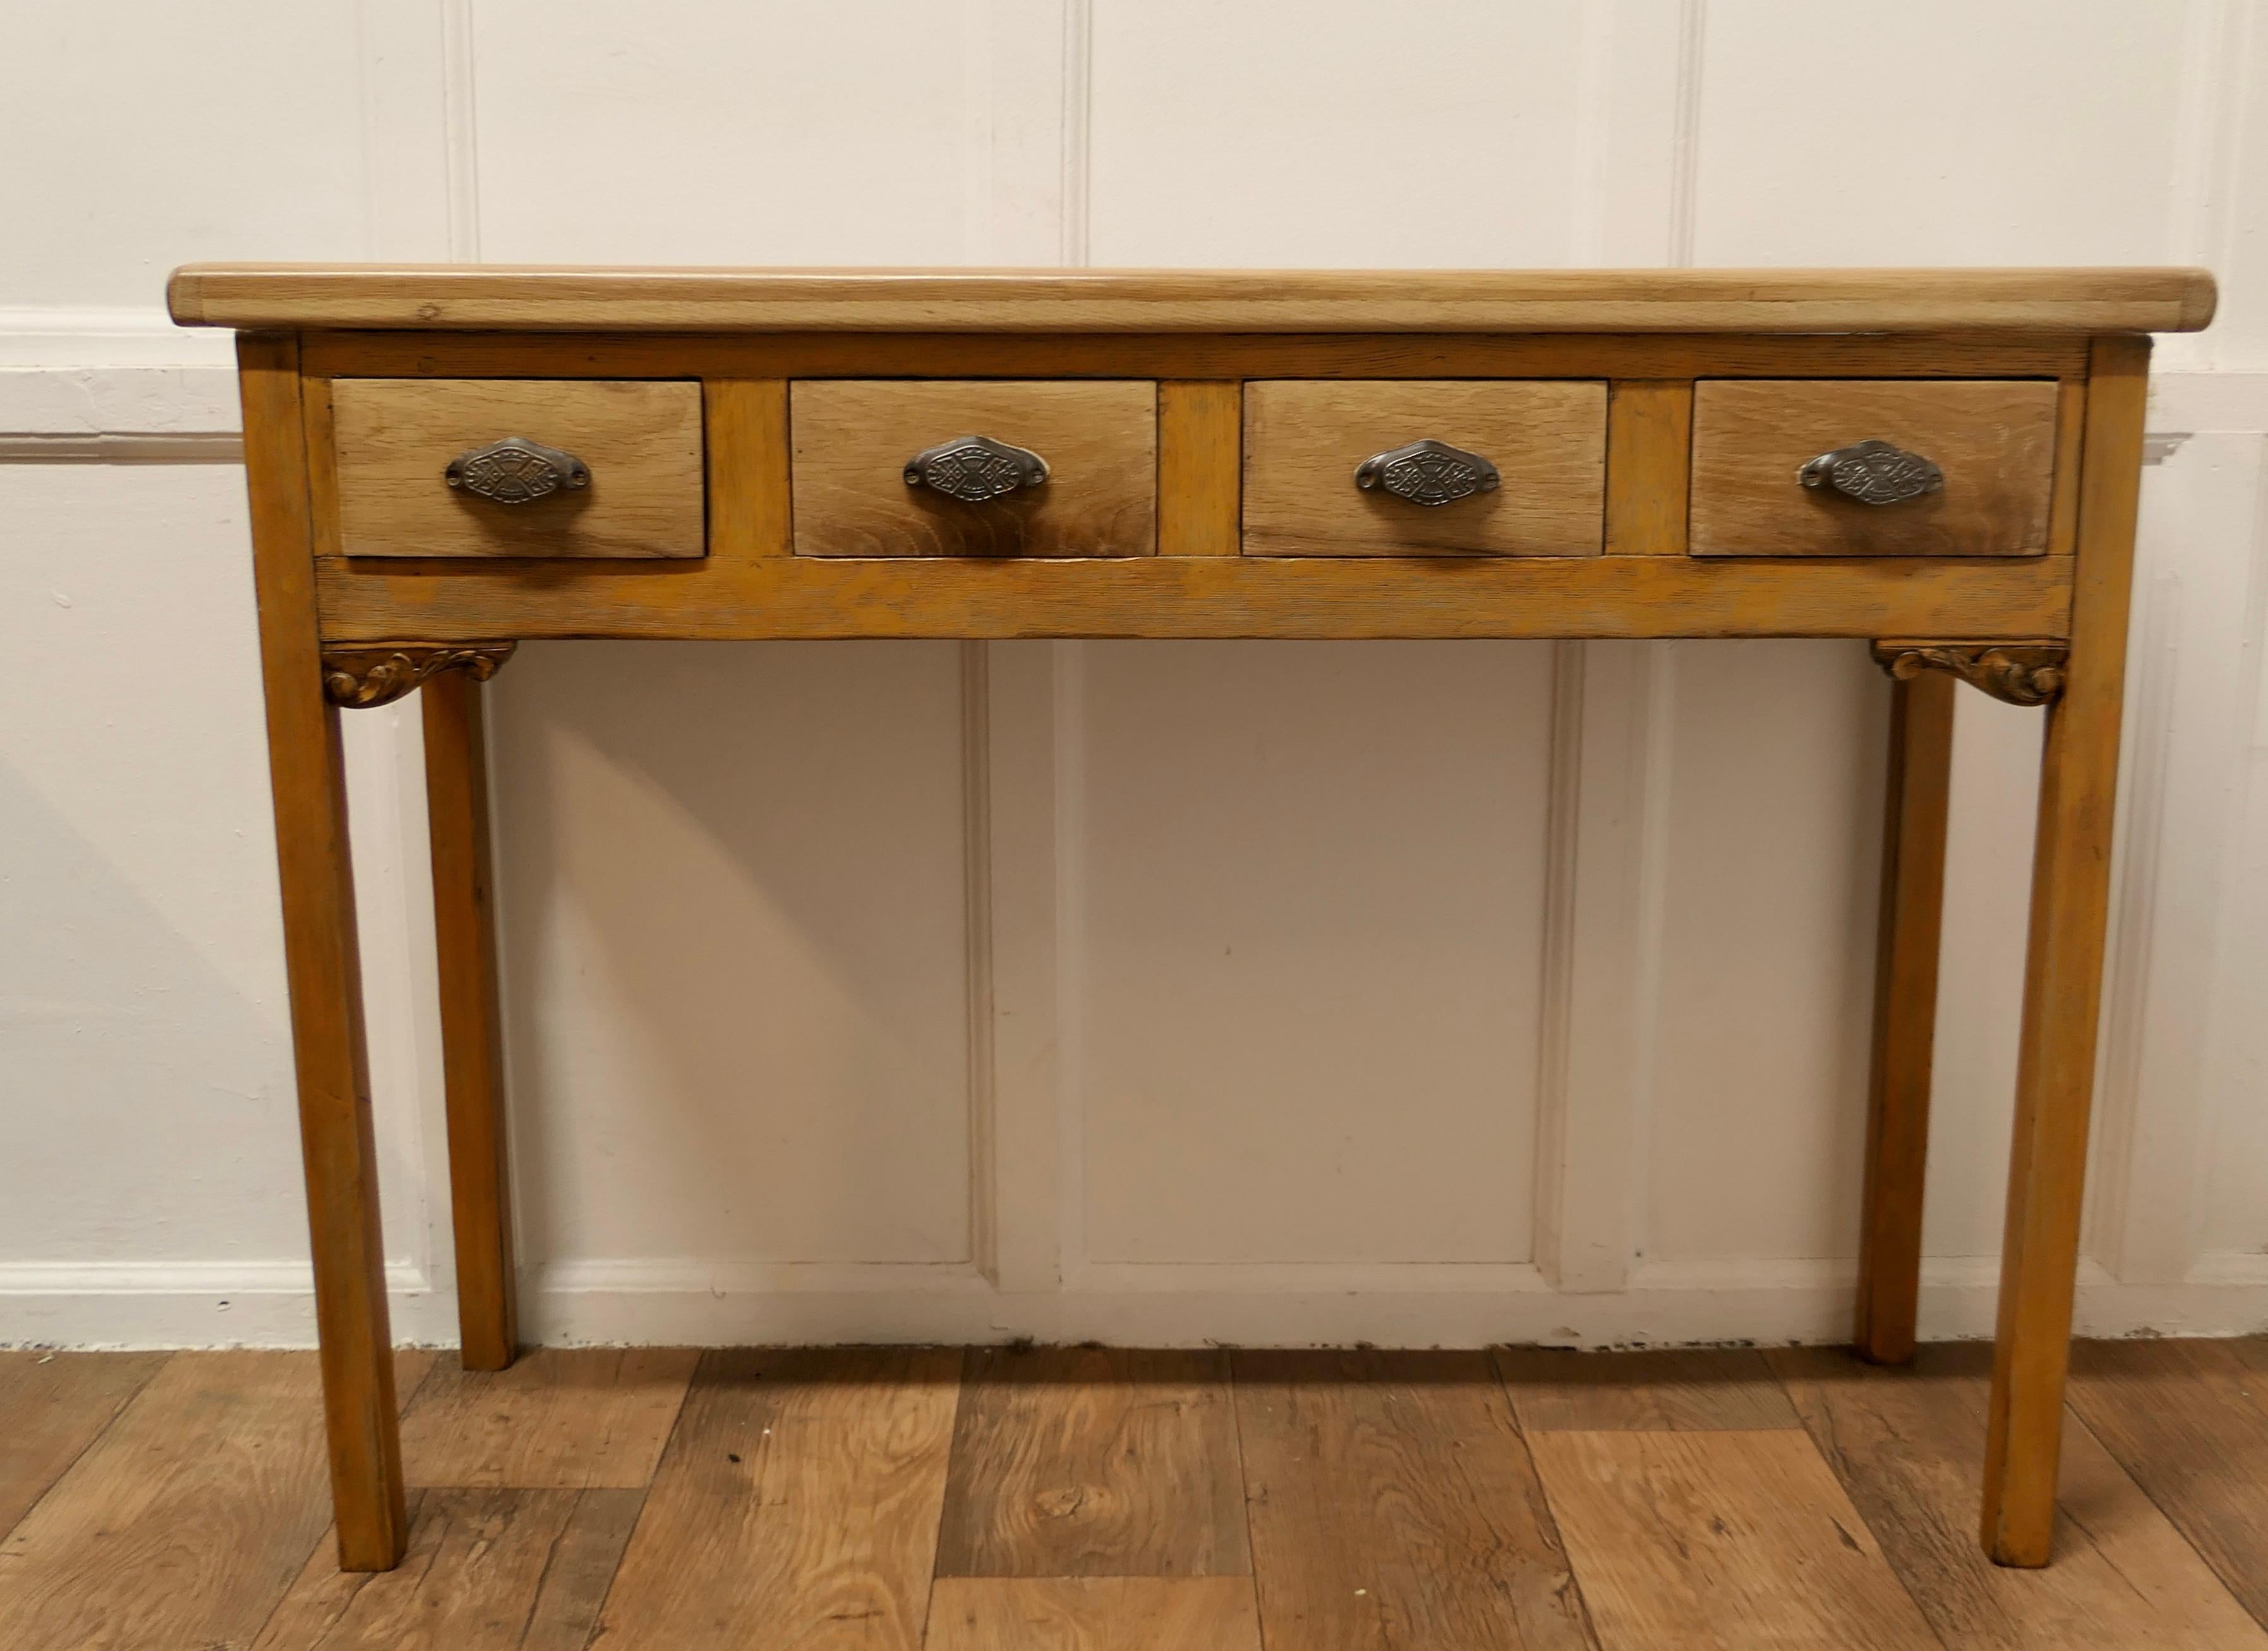 Golden Oak Hall Table, Serving Table

This is a lovely country made piece it is made in Golden Oak which has a wonderful blonde patina
The table is set on square legs and has 4 drawers to the front , it has a magnificent thick plank top with cleated